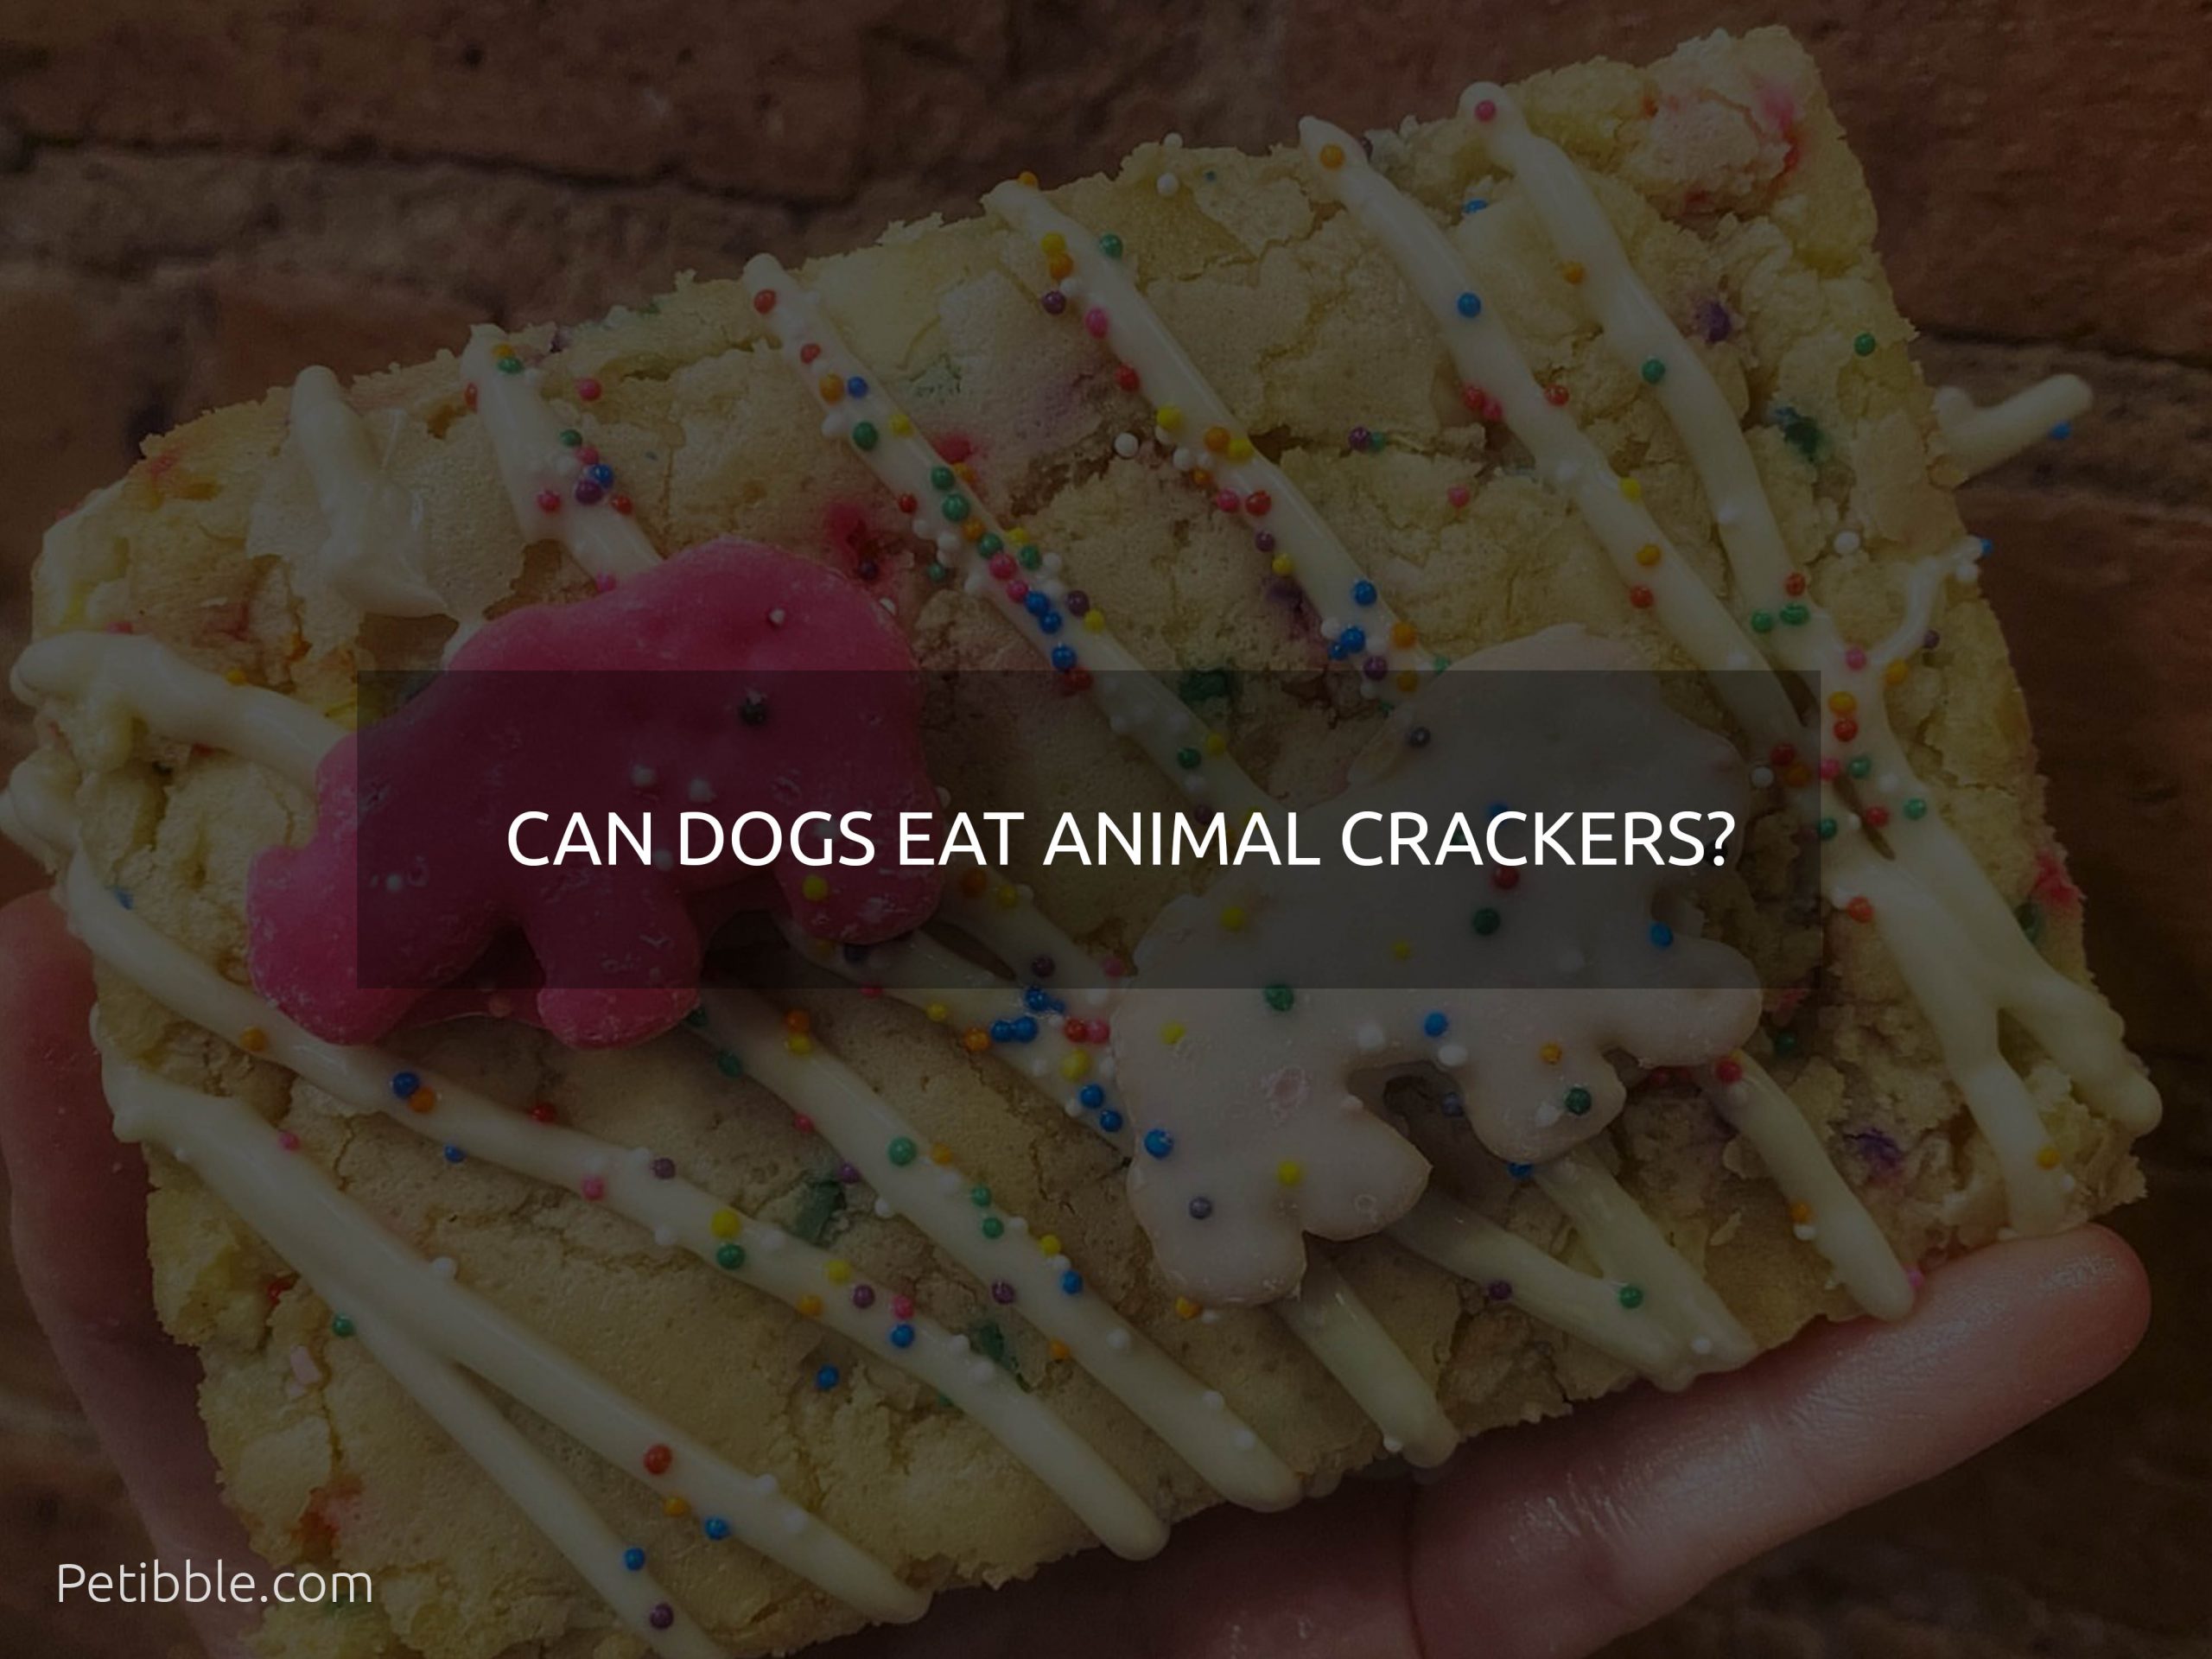 Can dogs eat animal crackers?